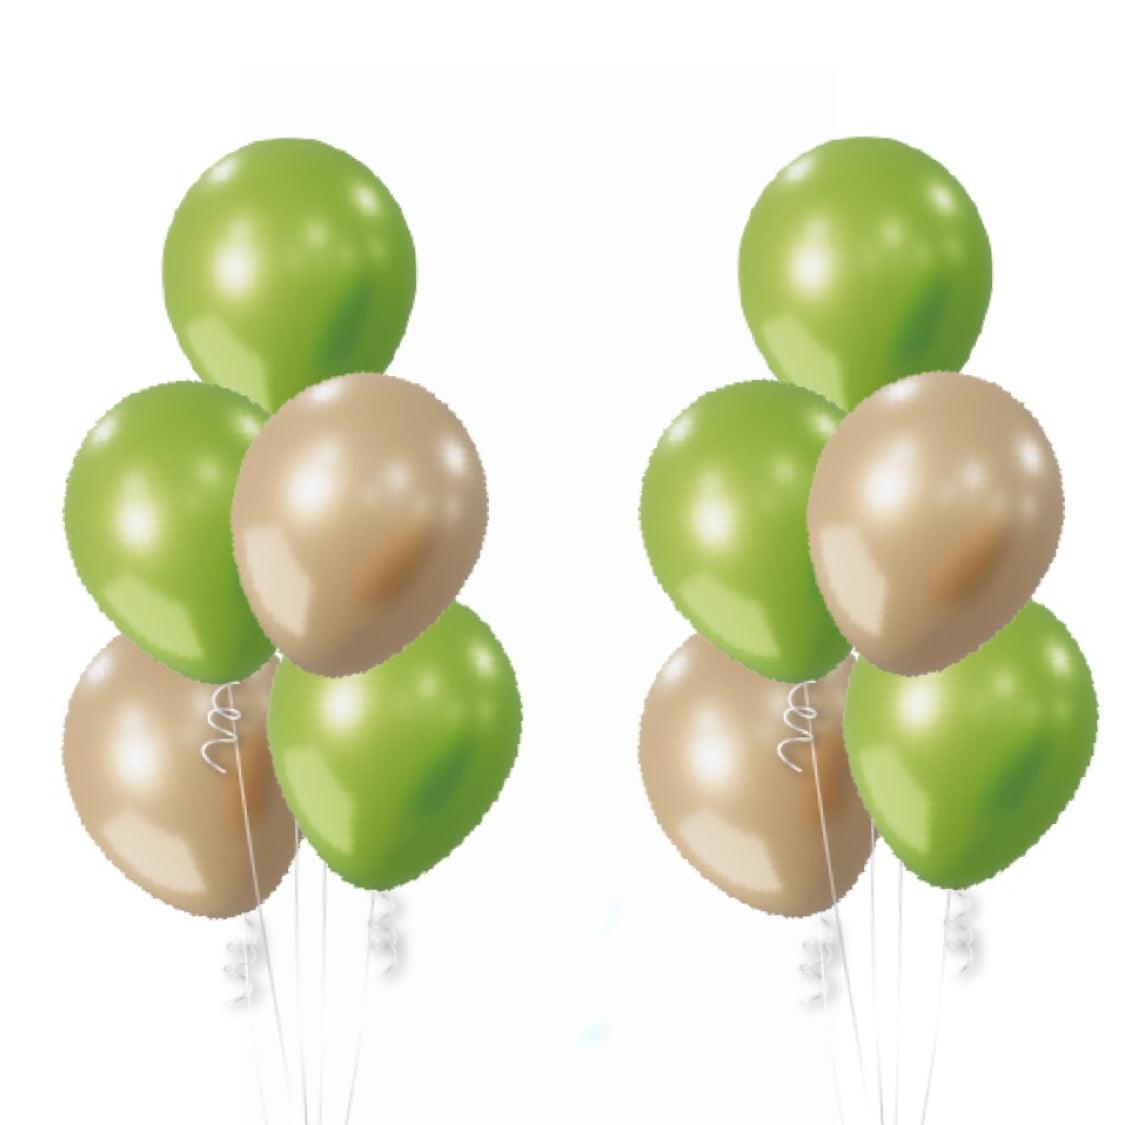 Chrome gold luxury with lime green balloon 2 bouquets of 5 - ONE UP BALLOONS